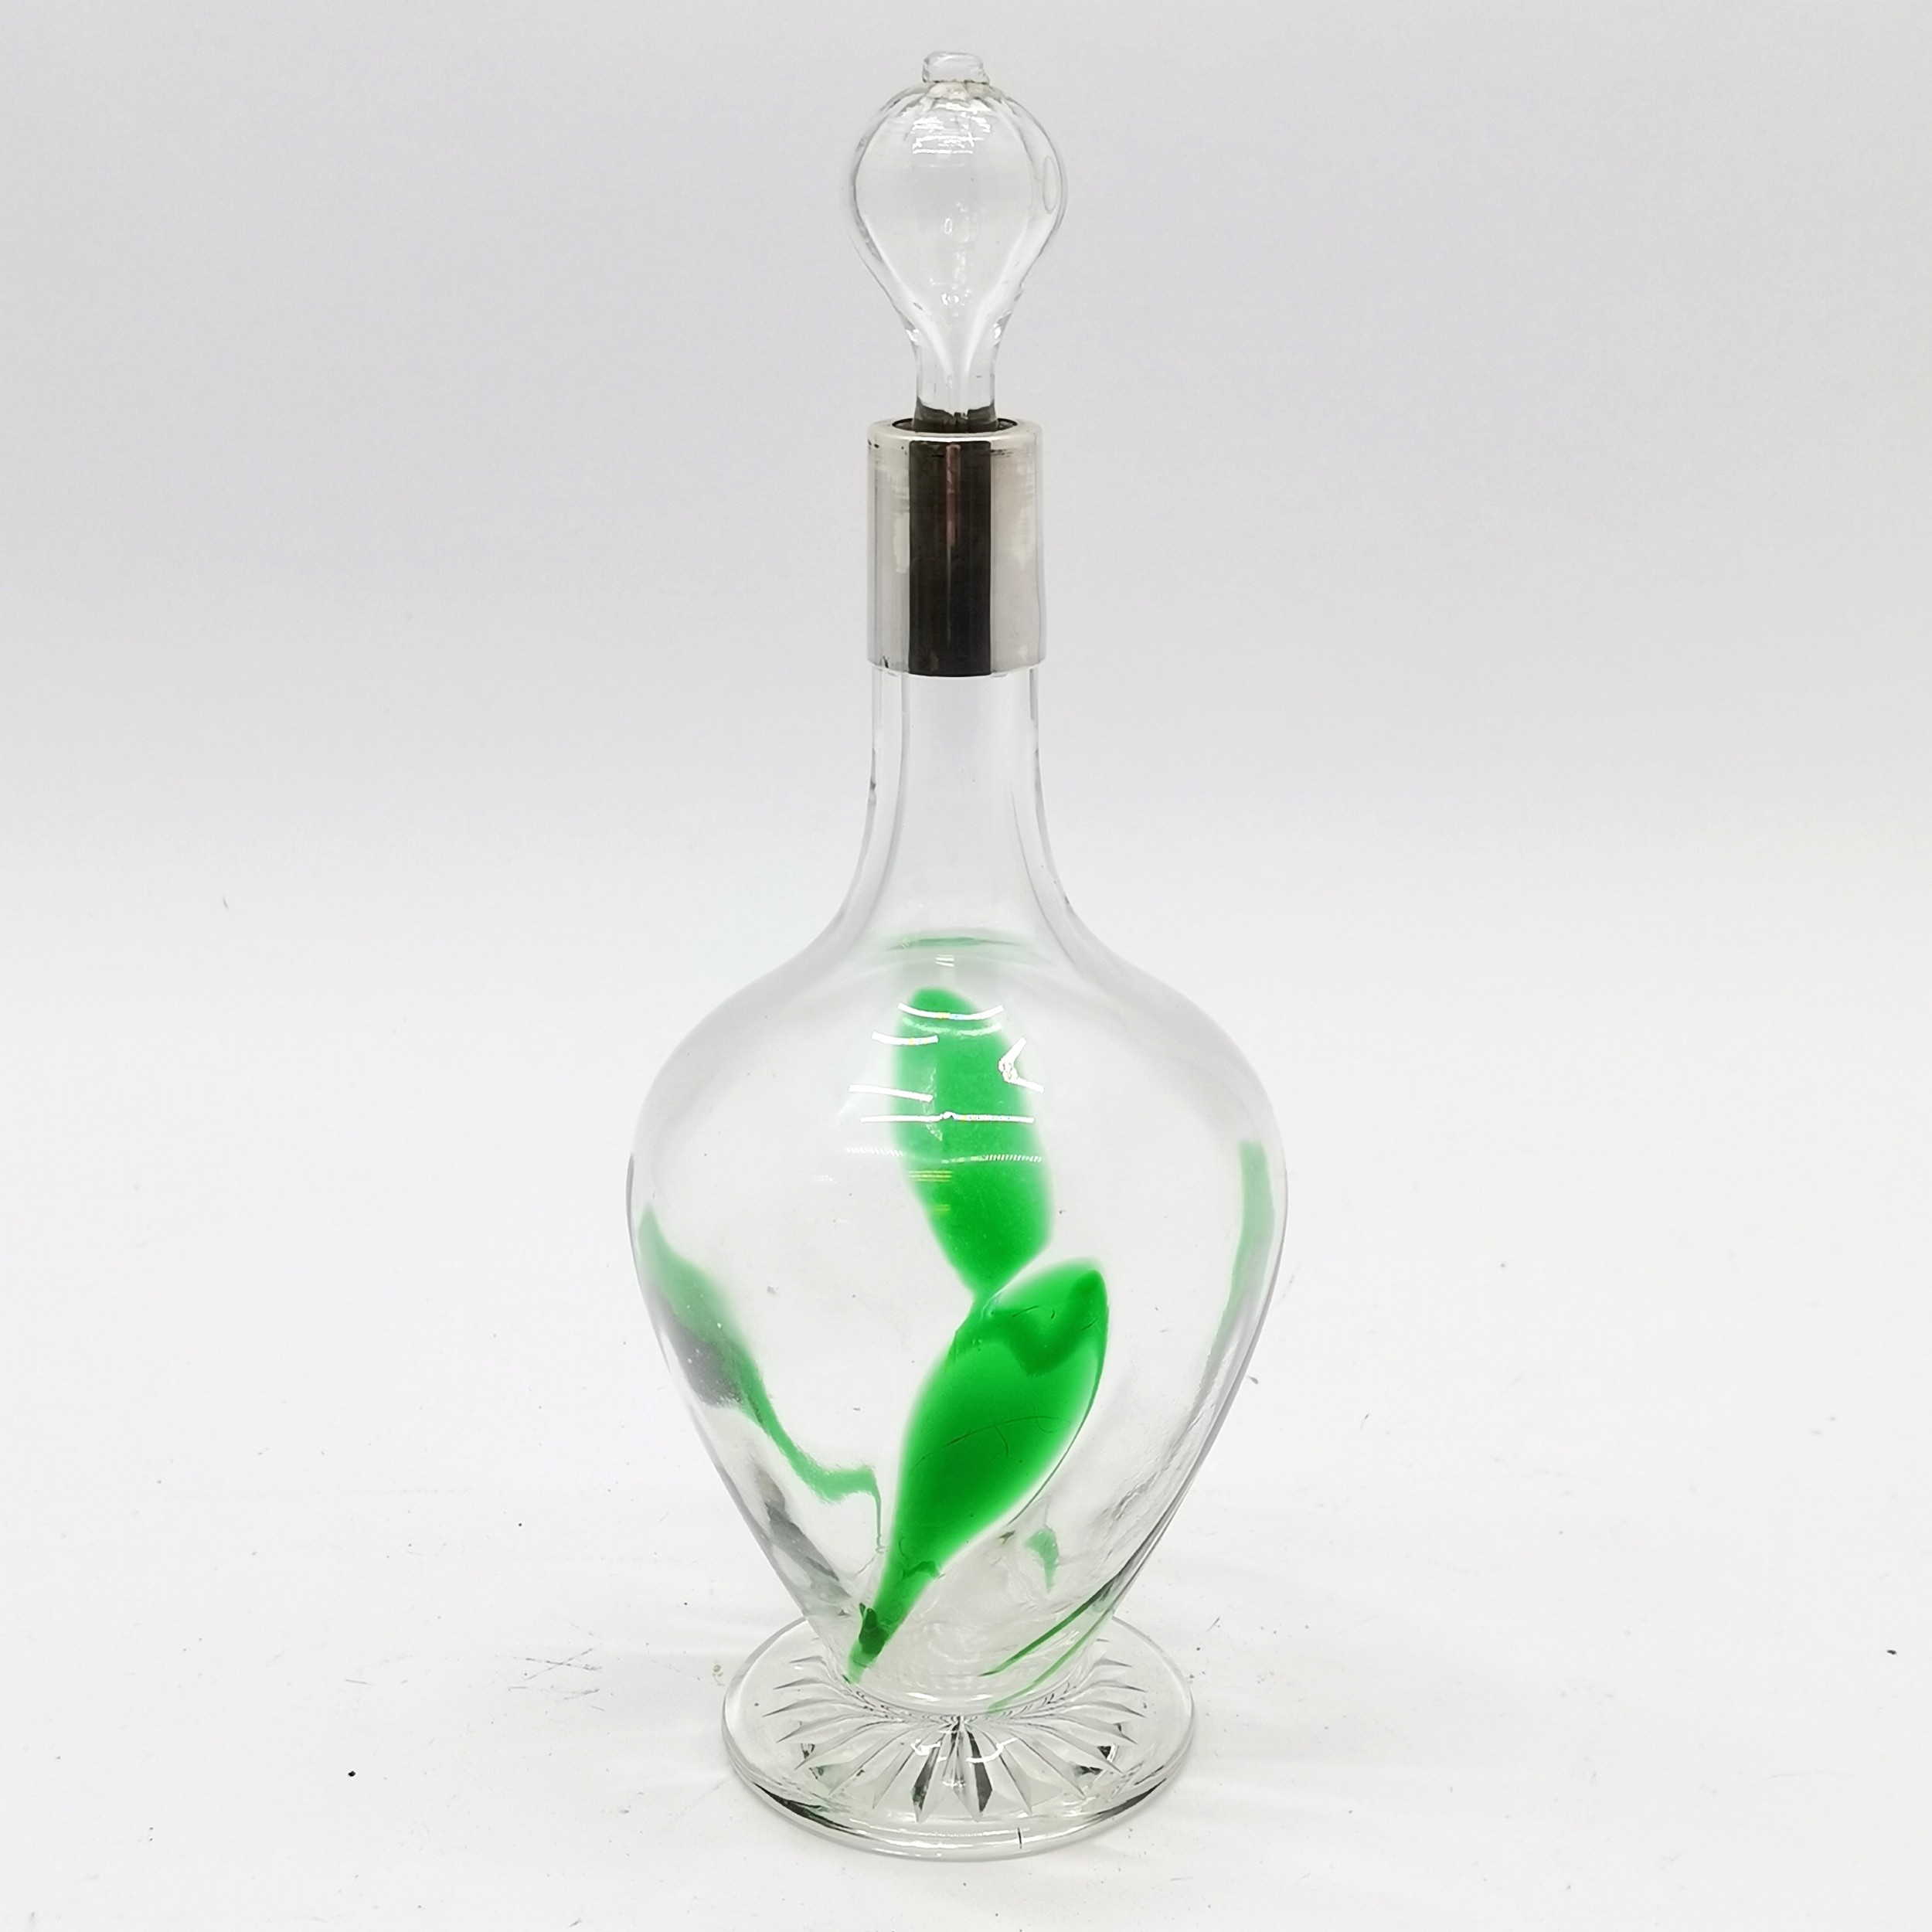 Sterling silver marked collar Art Nouveau glass decanter with green overlay swirl decoration, 30cm